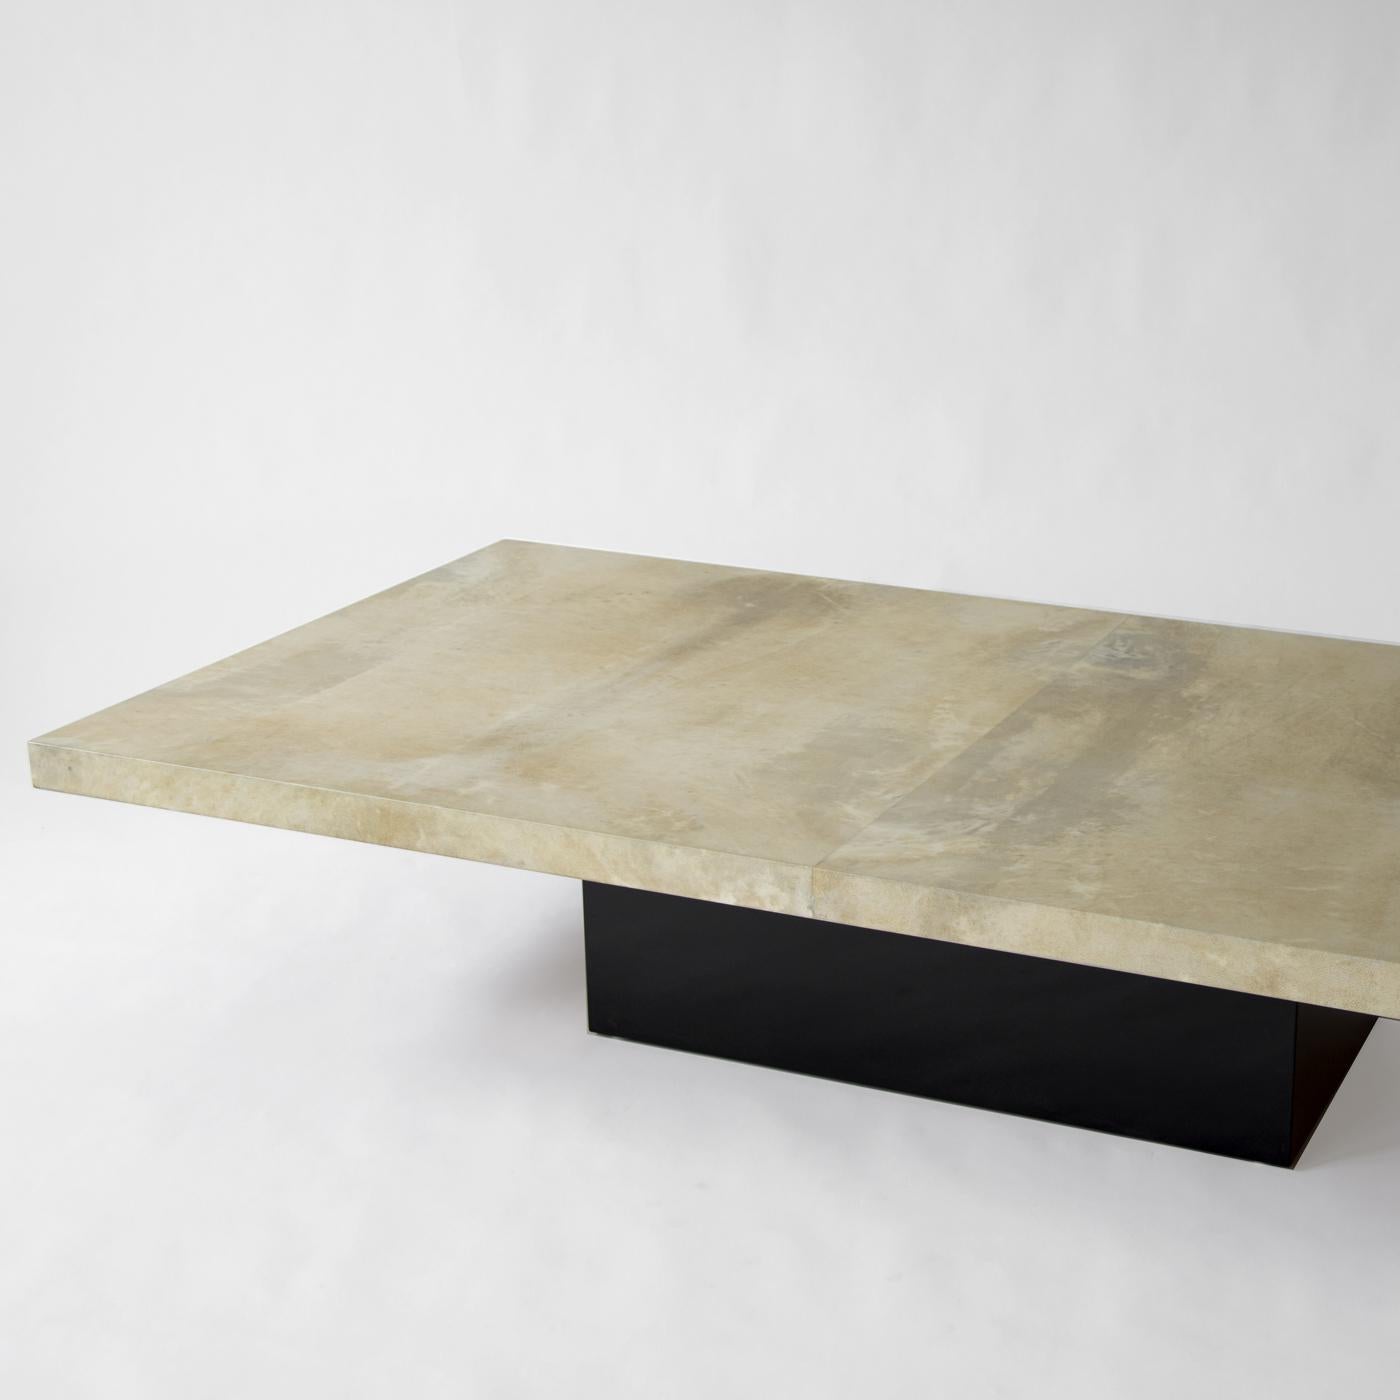 This modern and stylish goatskin coffee table features a top in original natural parchment with a matte finish. The sturdy base has been modernized and lacquered black and combines with the spectacular top to make it an elegant and unique piece that